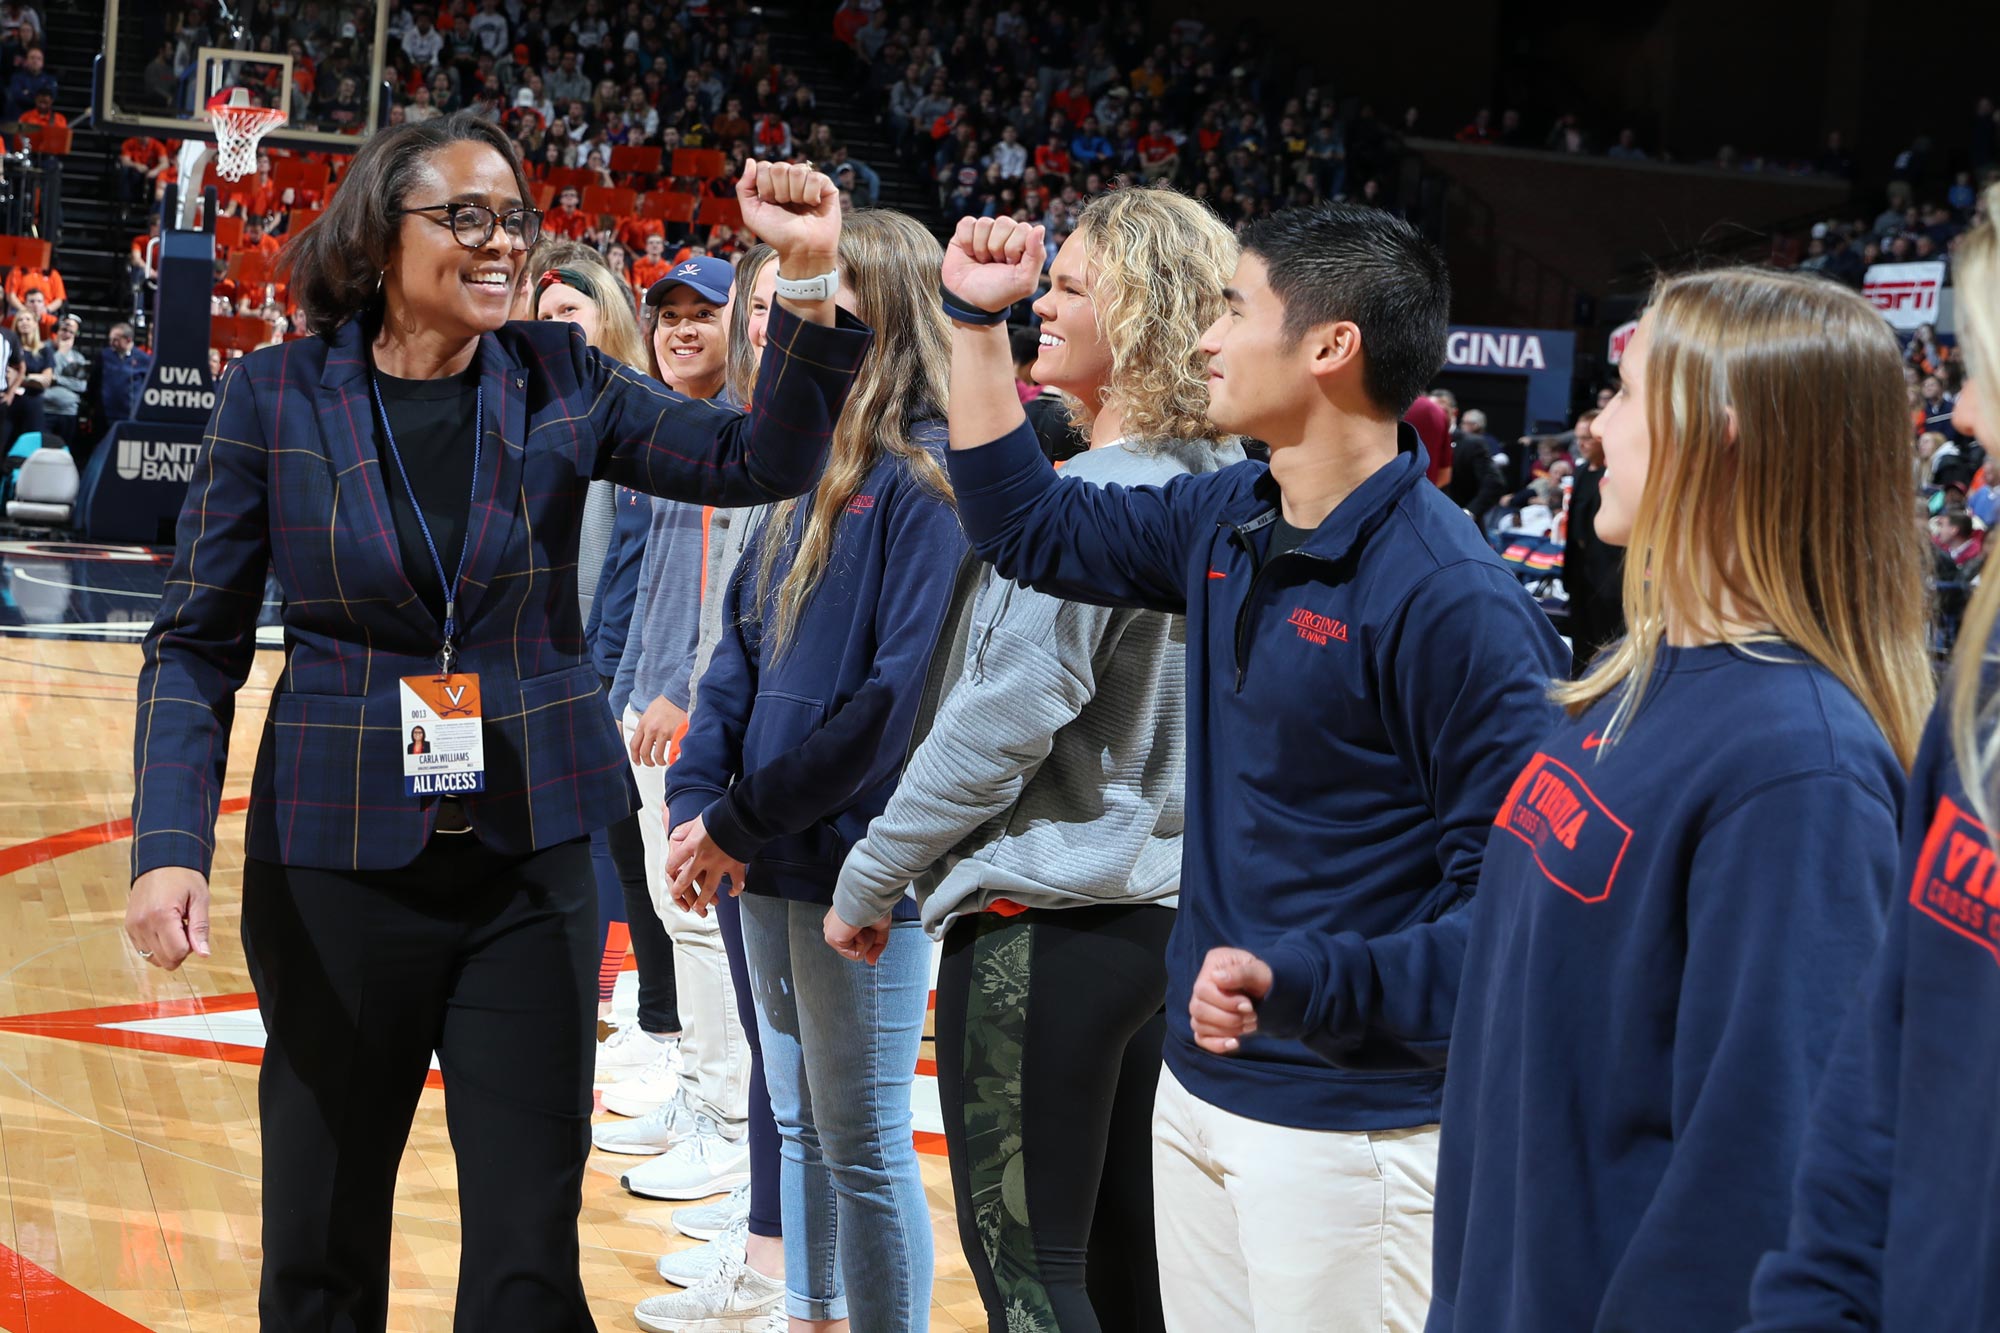 Carla Williams giving fist bumps to a line of students who are standing on the basketball court